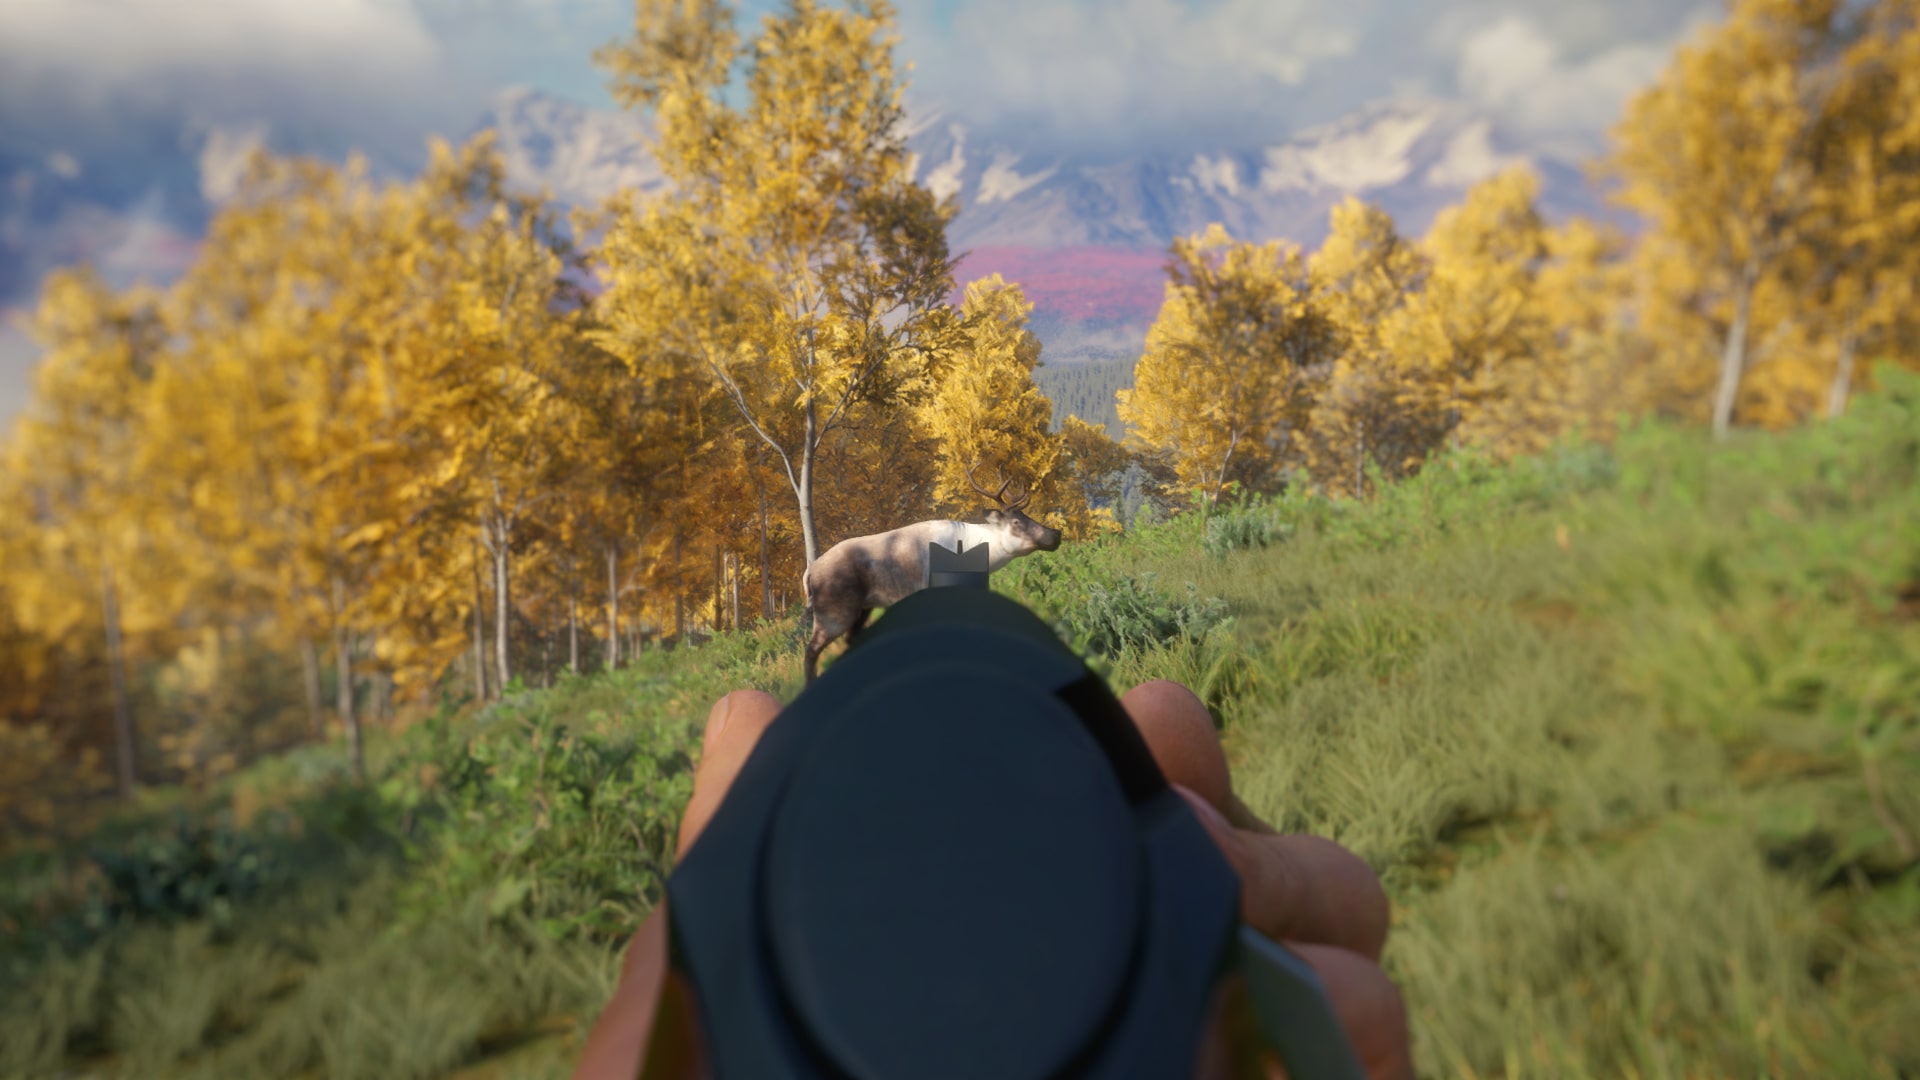 theHunter: Call of the Wild - Hunter Power Pack at the best price